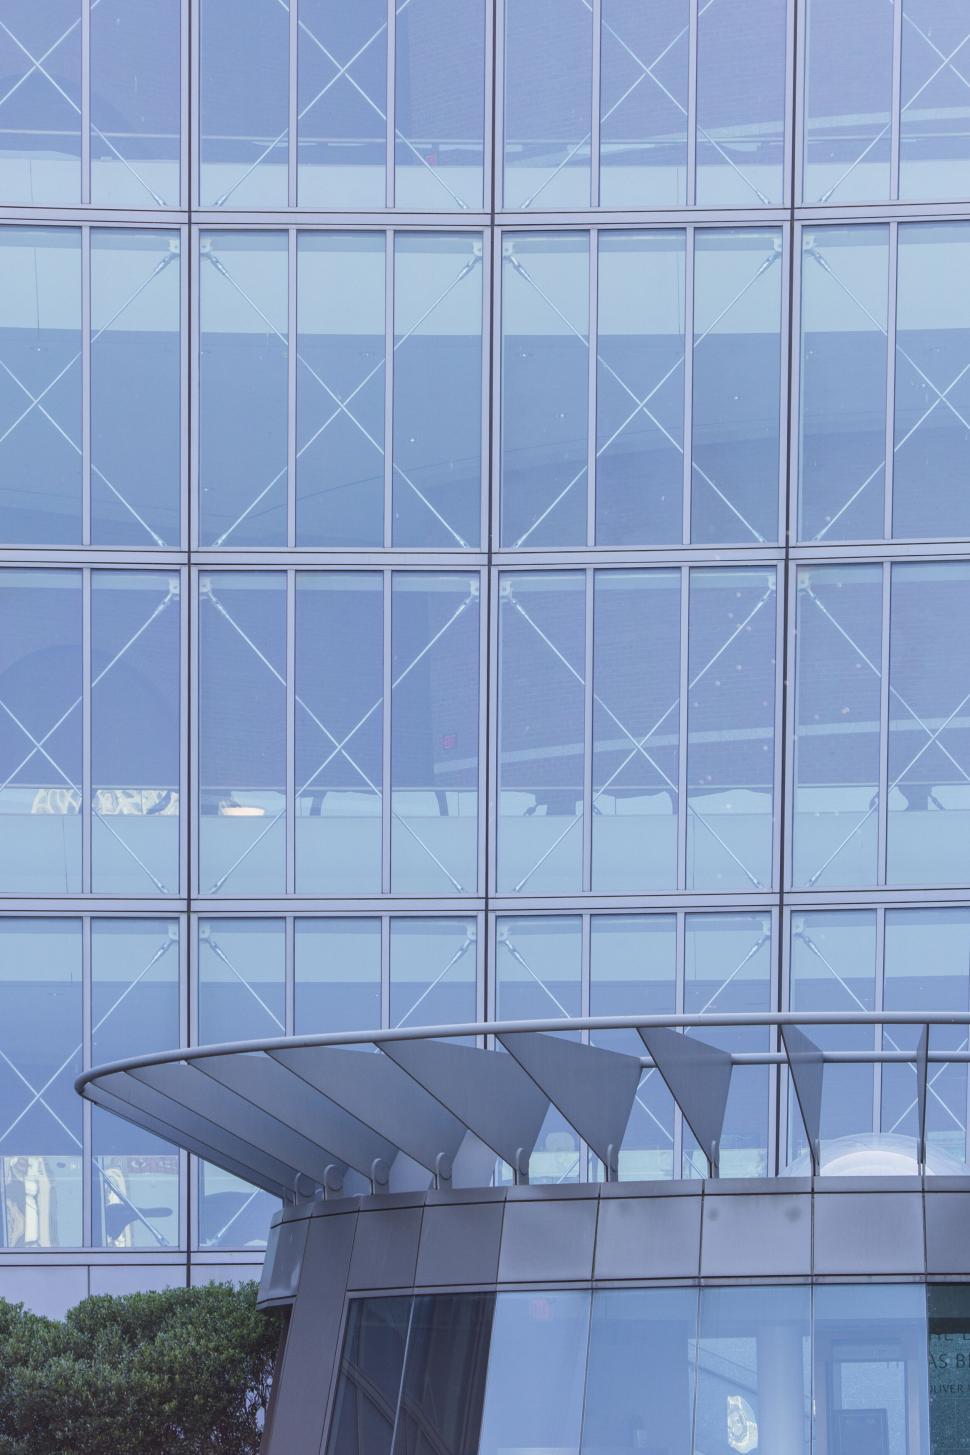 Free Image of Modern glass building facade close-up view 